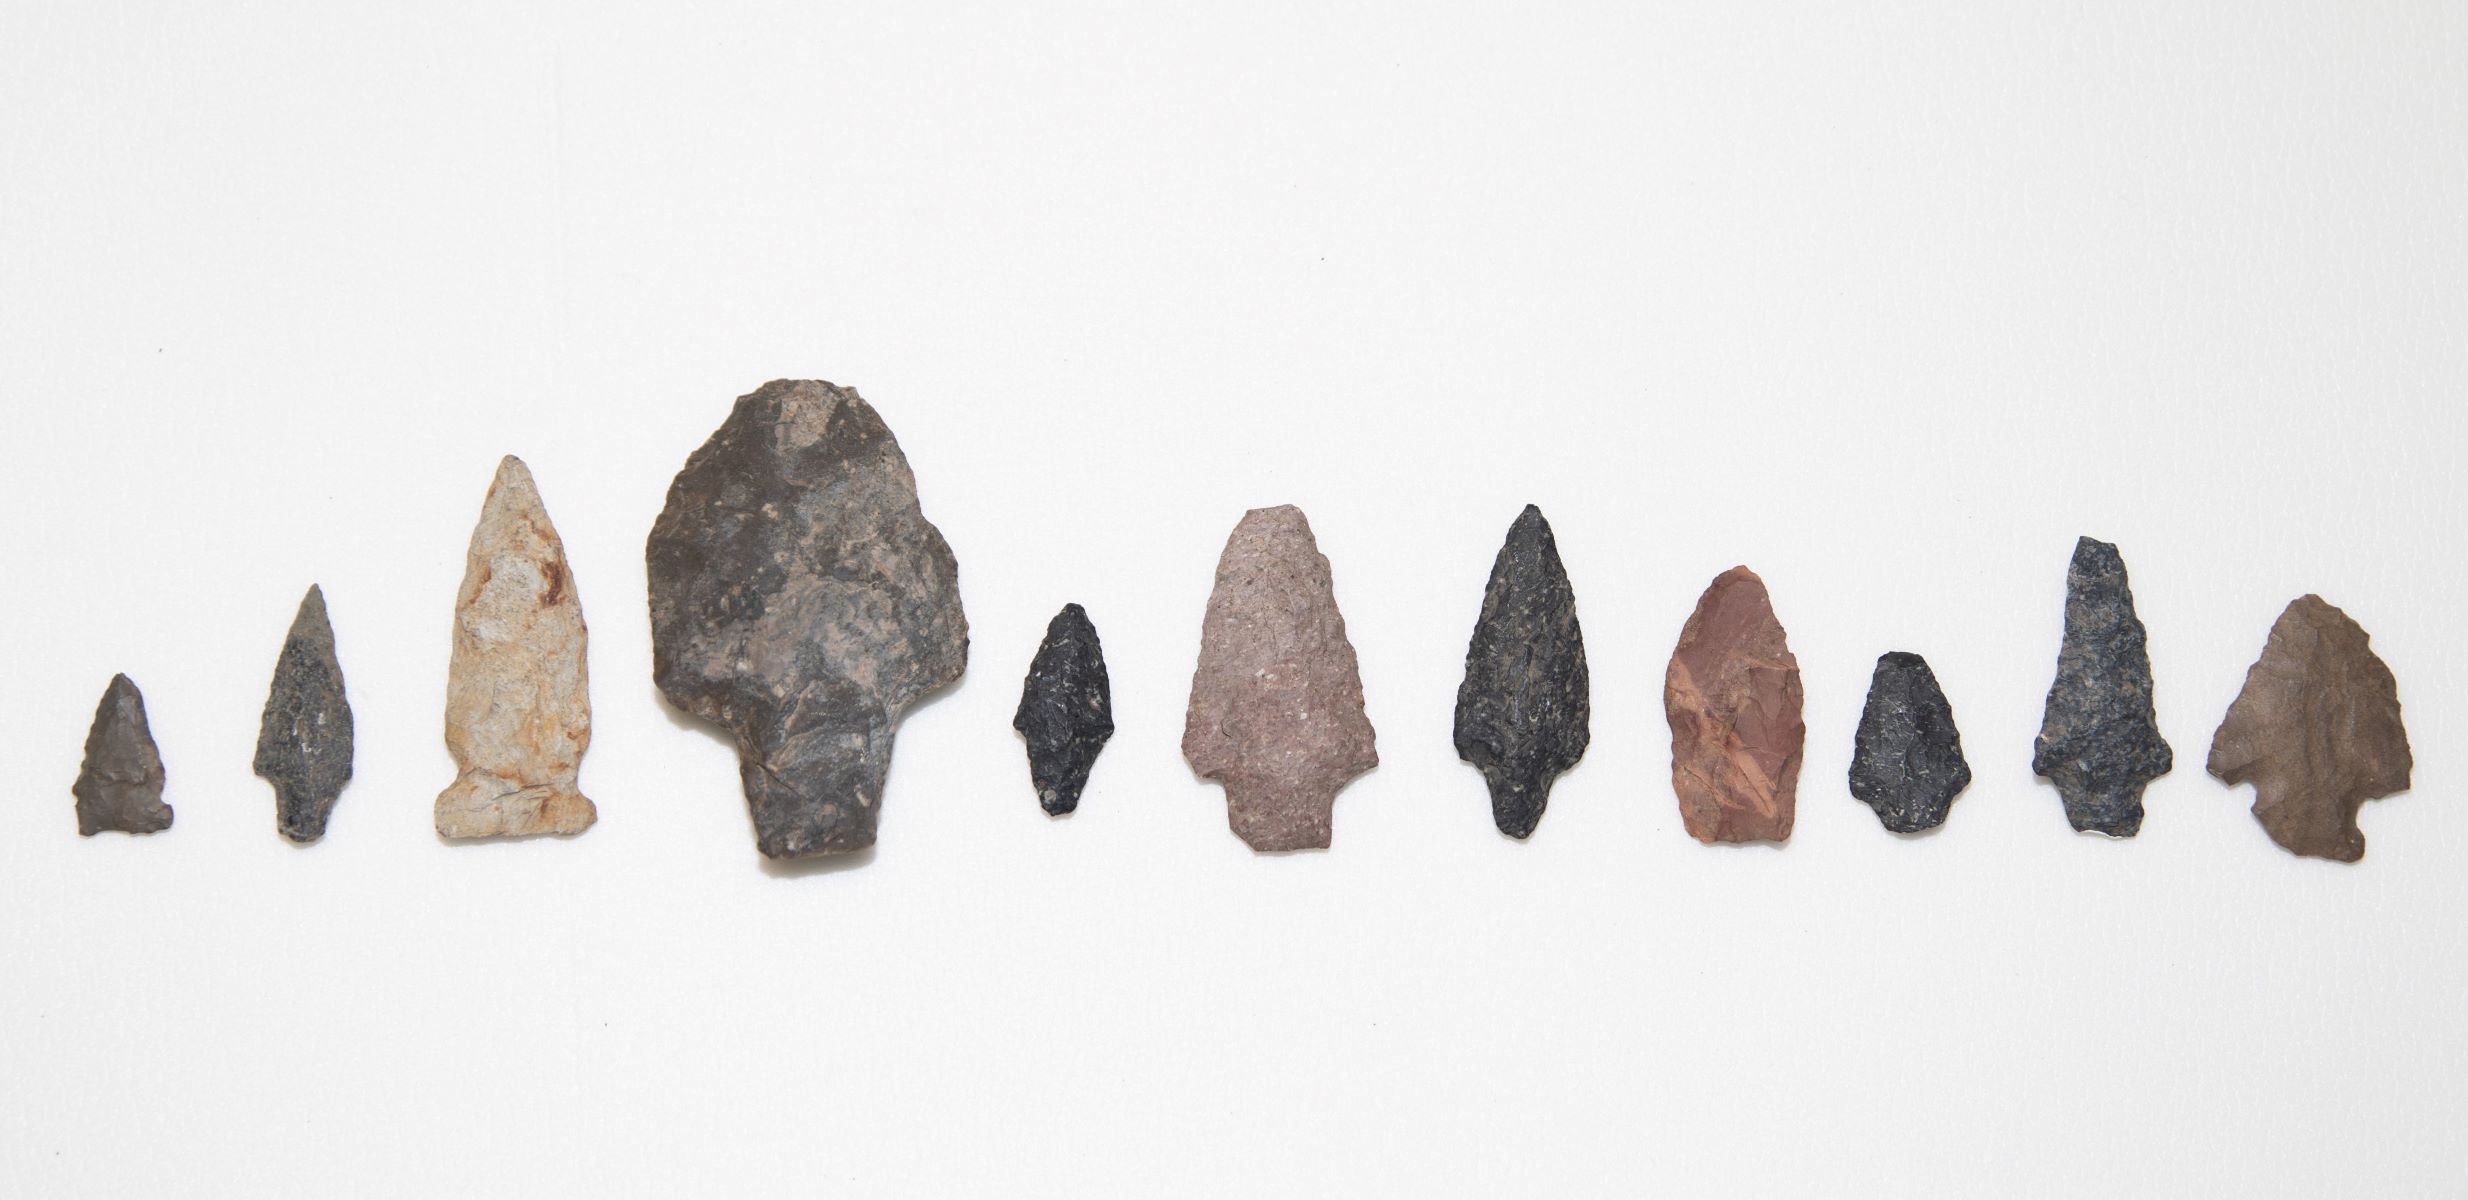 Discover The Ancient Stones Native Americans Used As Tools In The Northeast!